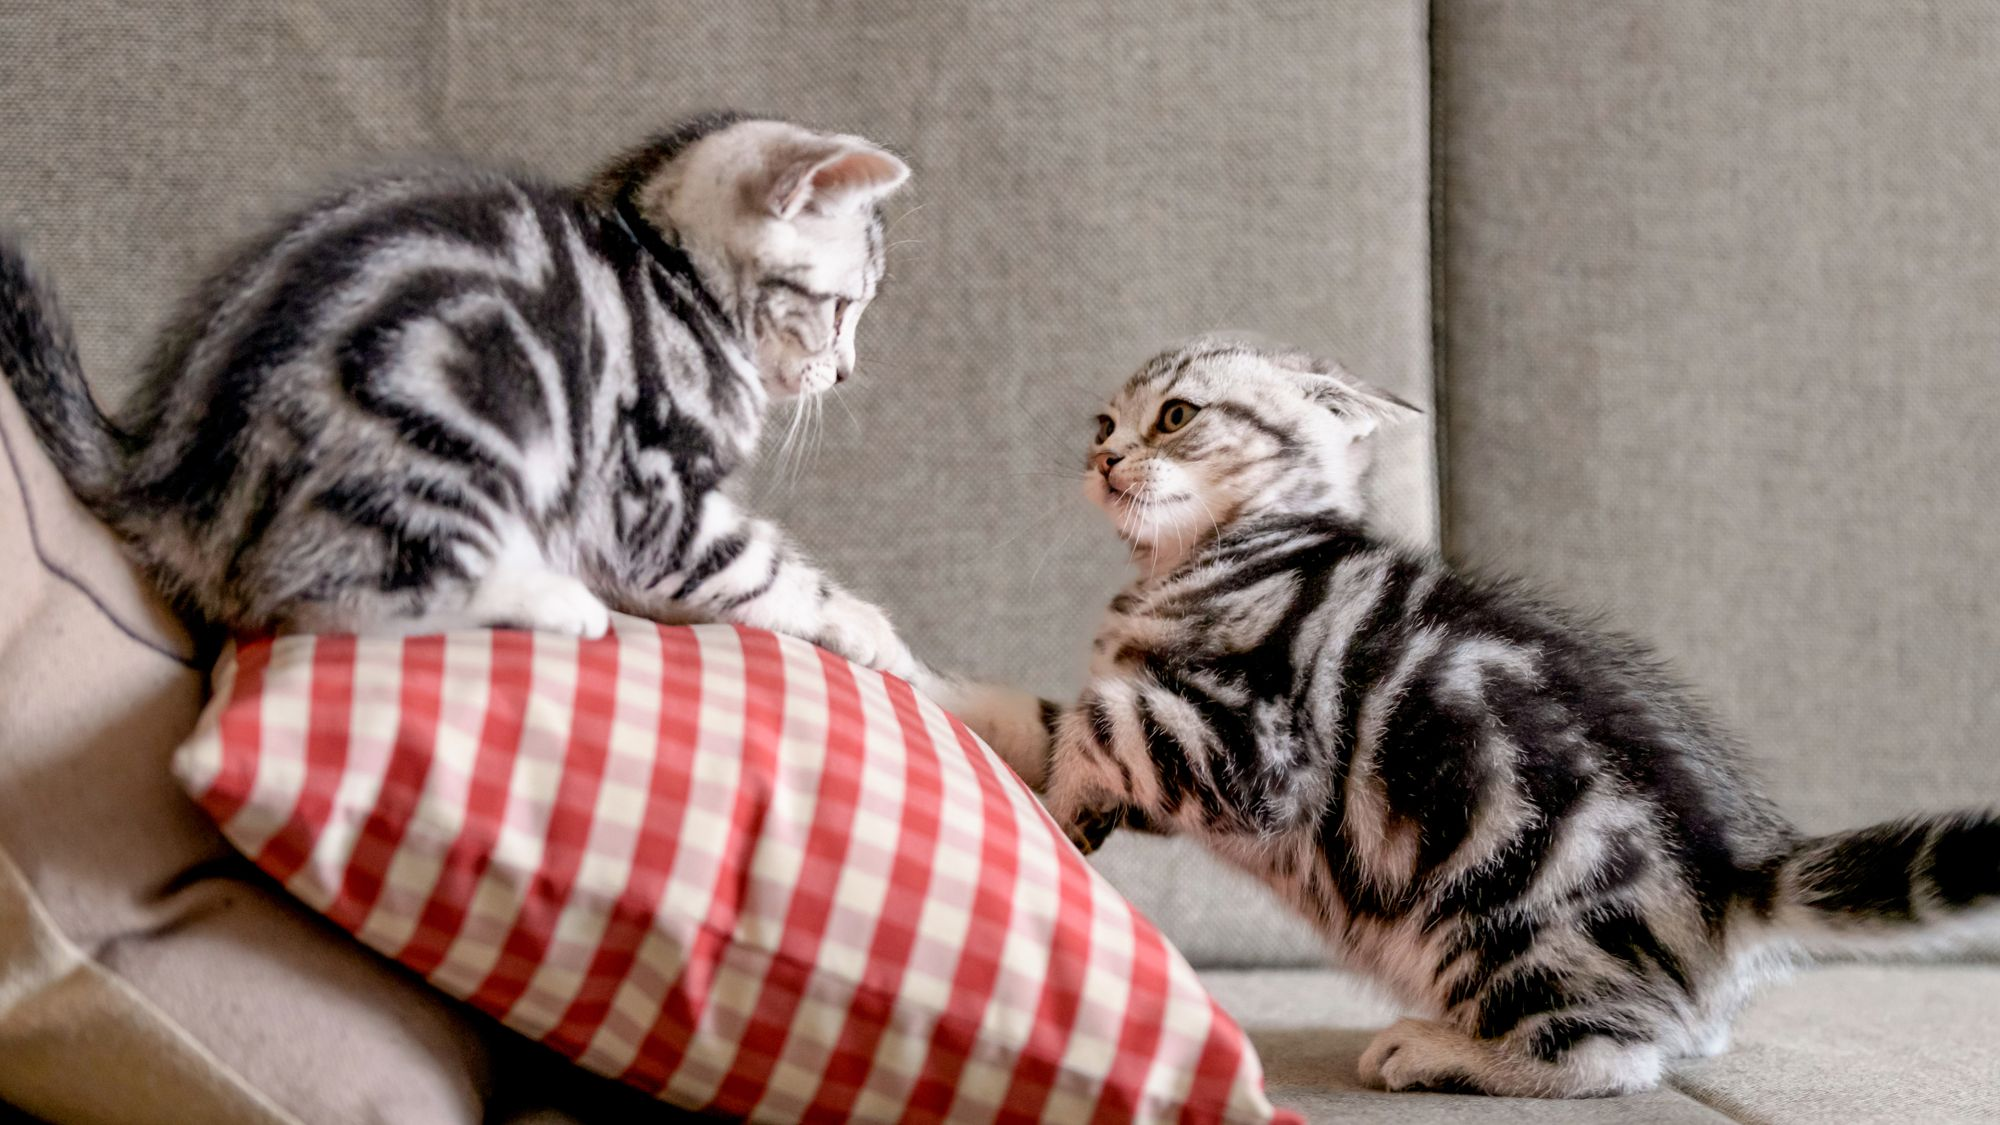 Tabby kittens playing together on a grey sofa